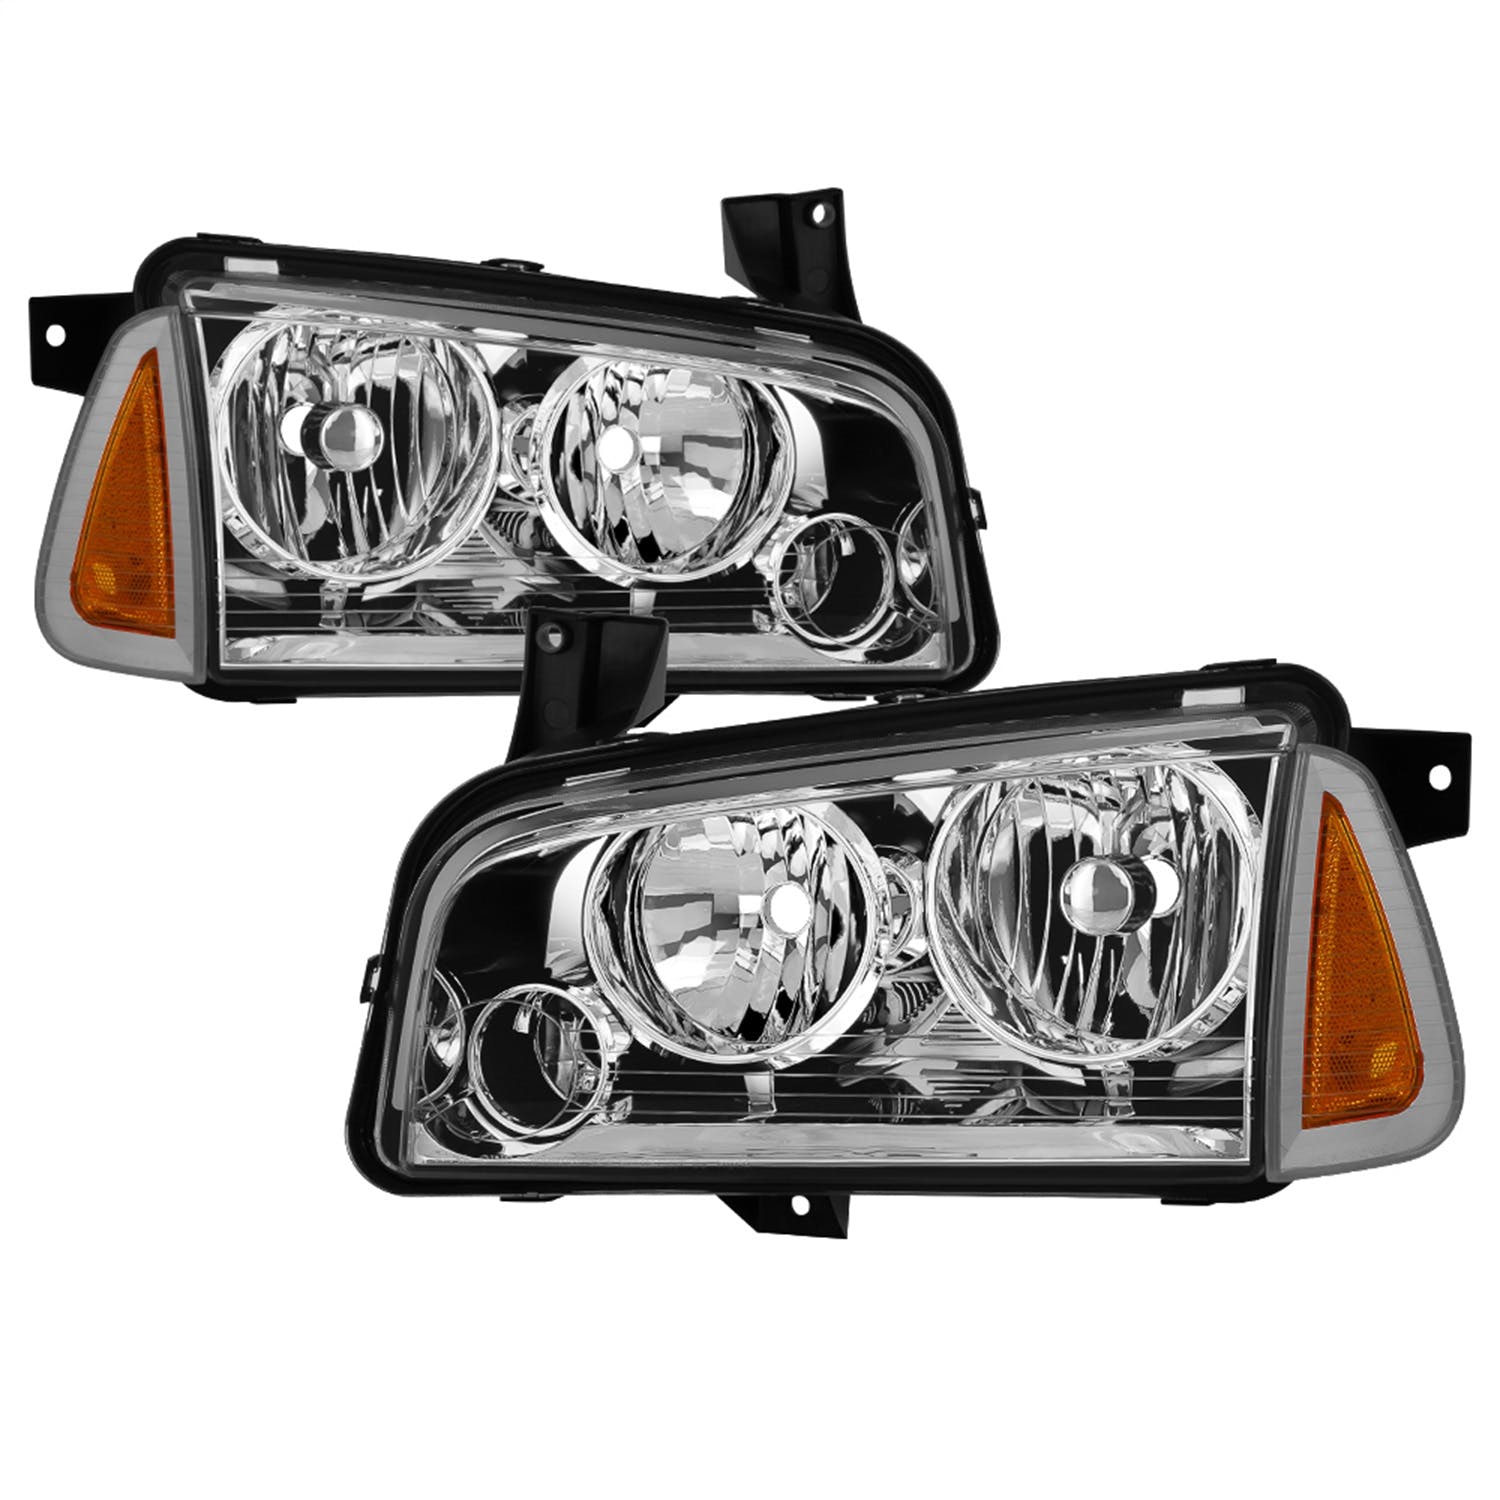 XTUNE POWER 9042393 Dodge Charger 05 10 Halogen Only (Does Not Fit HID Model) OEM Style Headlights with Corner 4pcs Chrome